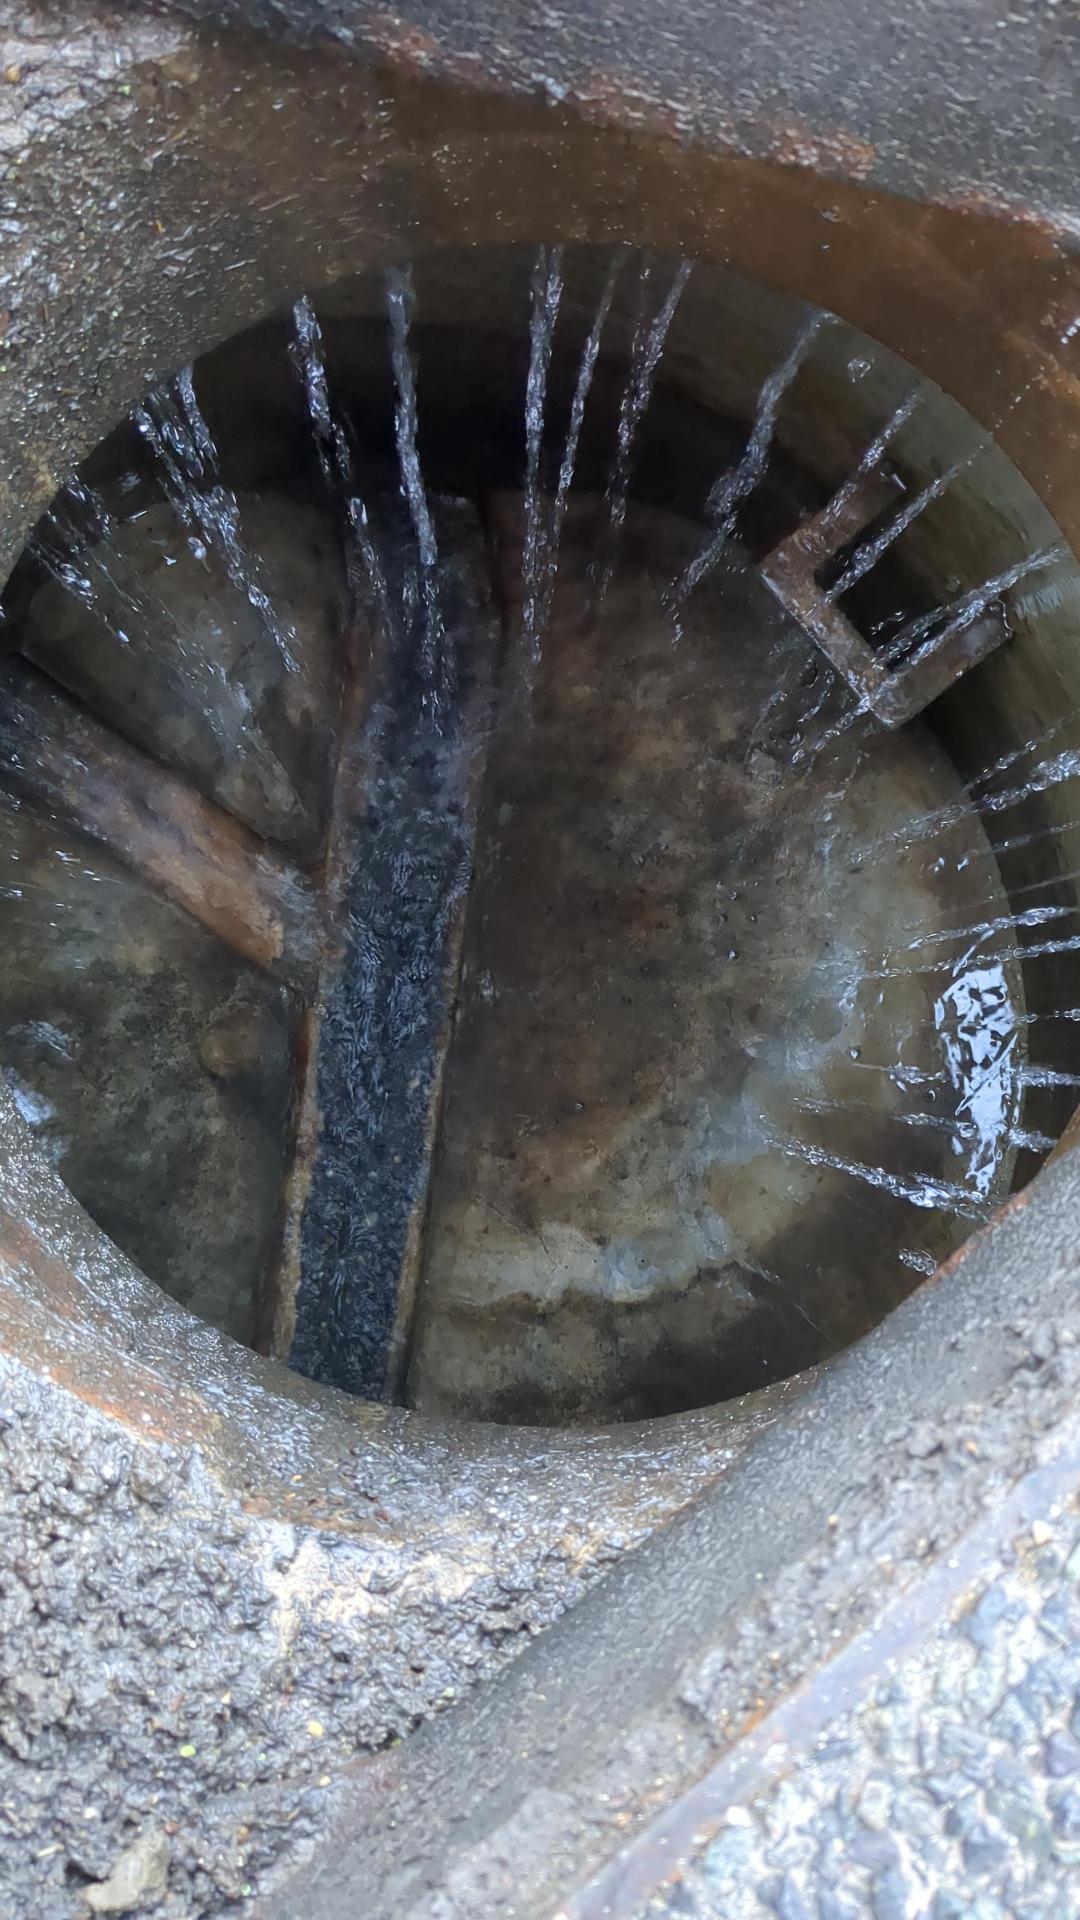 Groundwater infiltrating the brickwork of a manhole